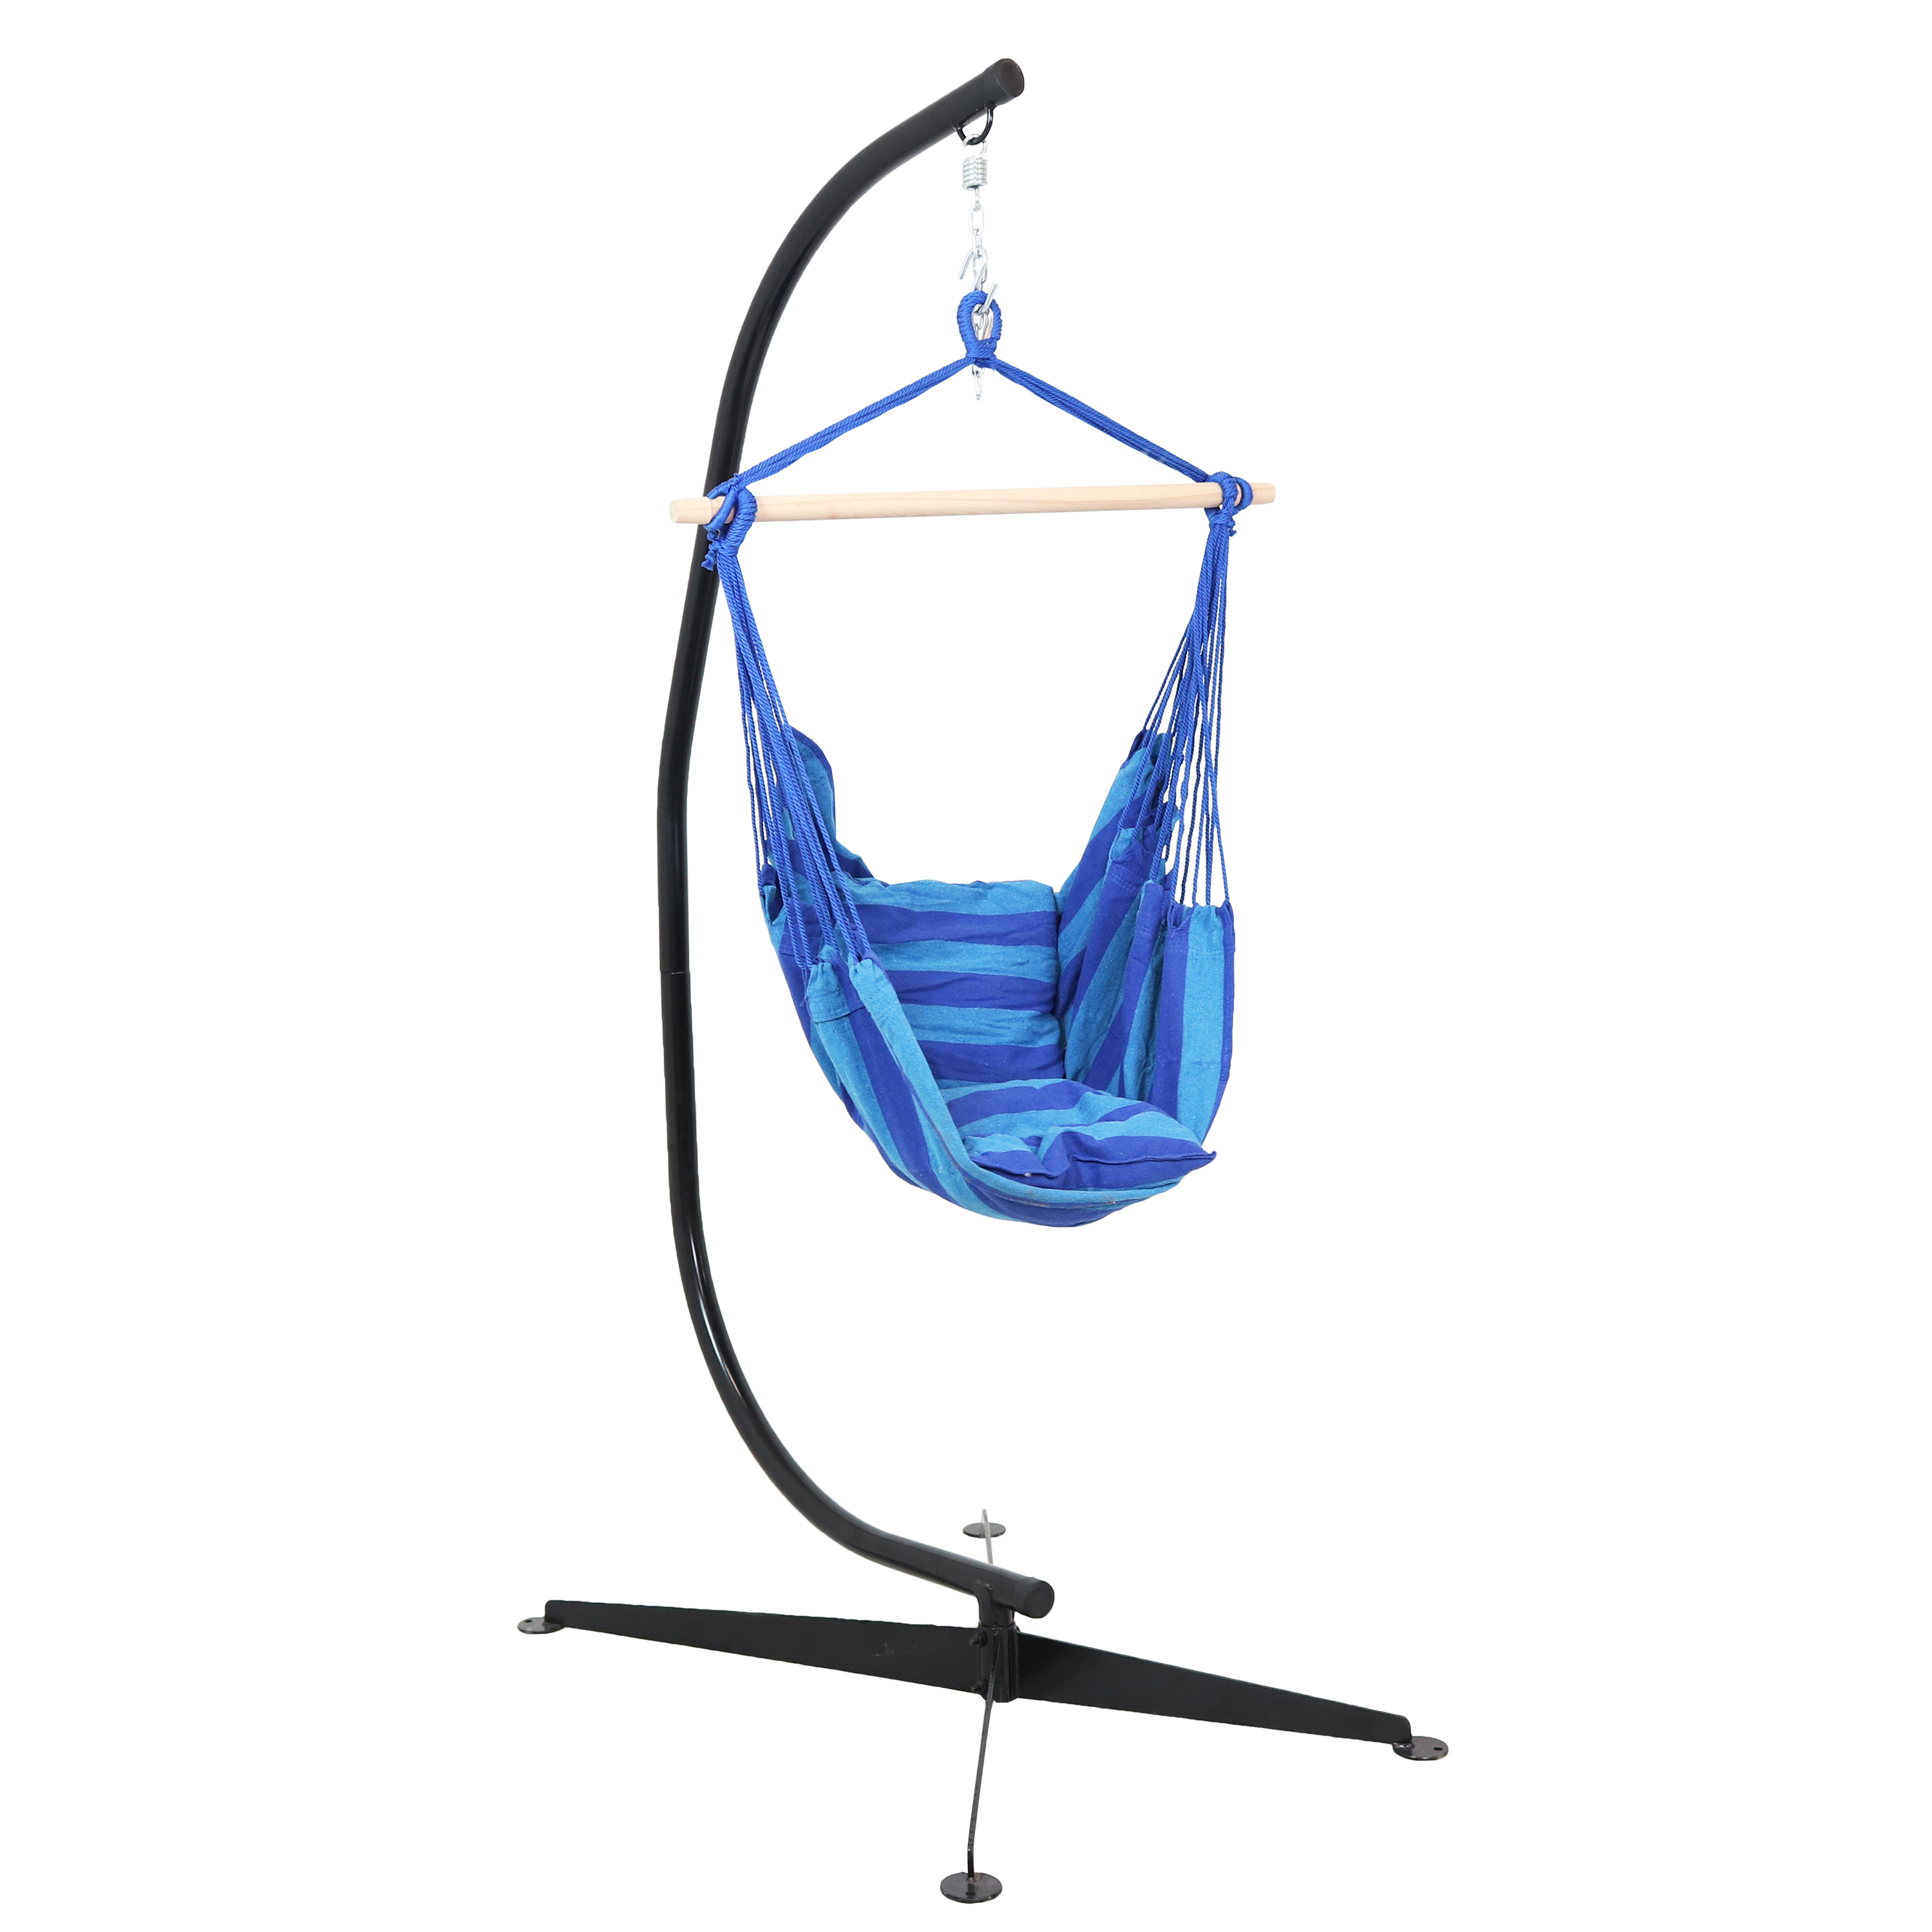 Sunnydaze Hanging Hammock Chair Swing and C-Stand Set, for Outdoor Use, Max Weight: 265 pounds, Includes 2 Seat Cushions, Oasis